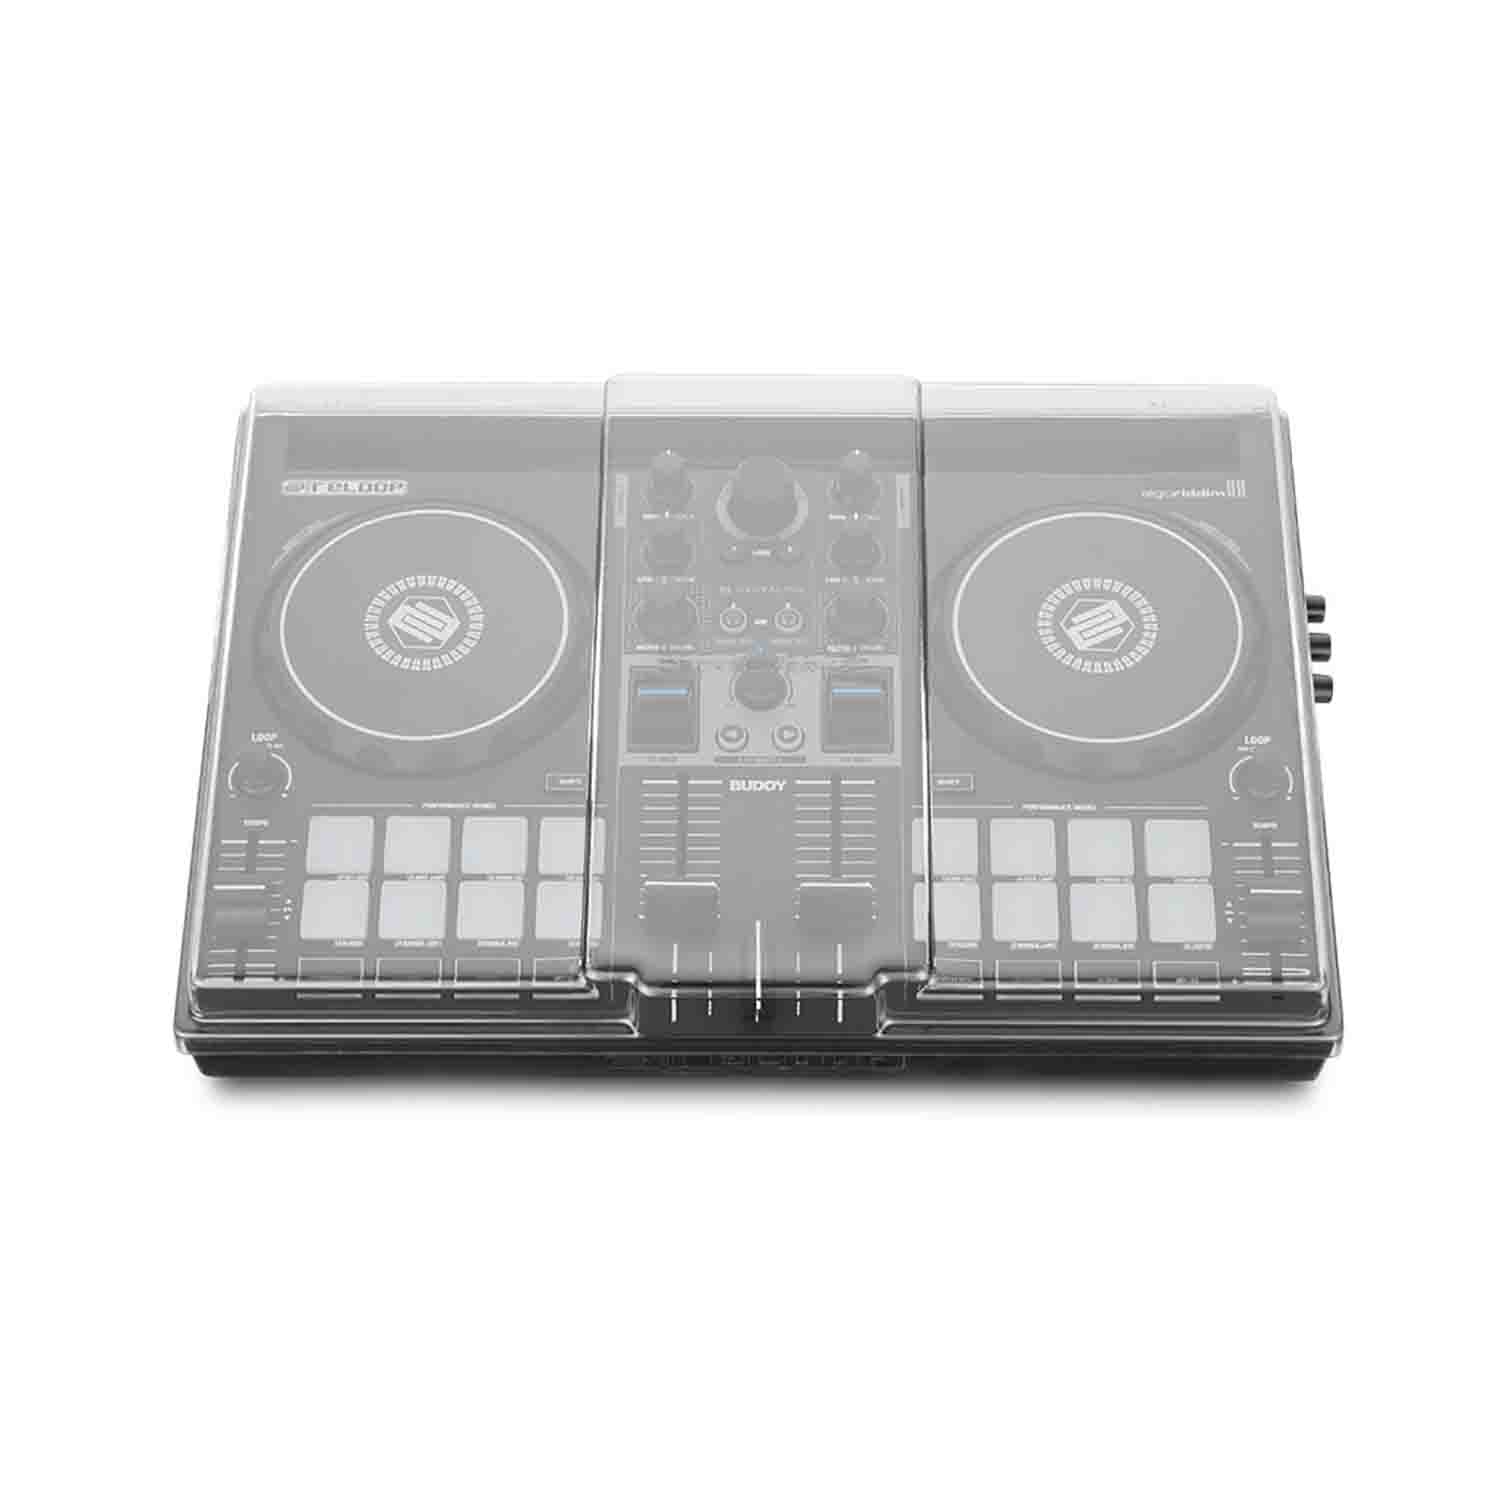 B-Stock: Decksaver DSLE-PC-READY Protection Cover for LE Reloop READY and BUDDY DJ Controller - Light Edition - Hollywood DJ